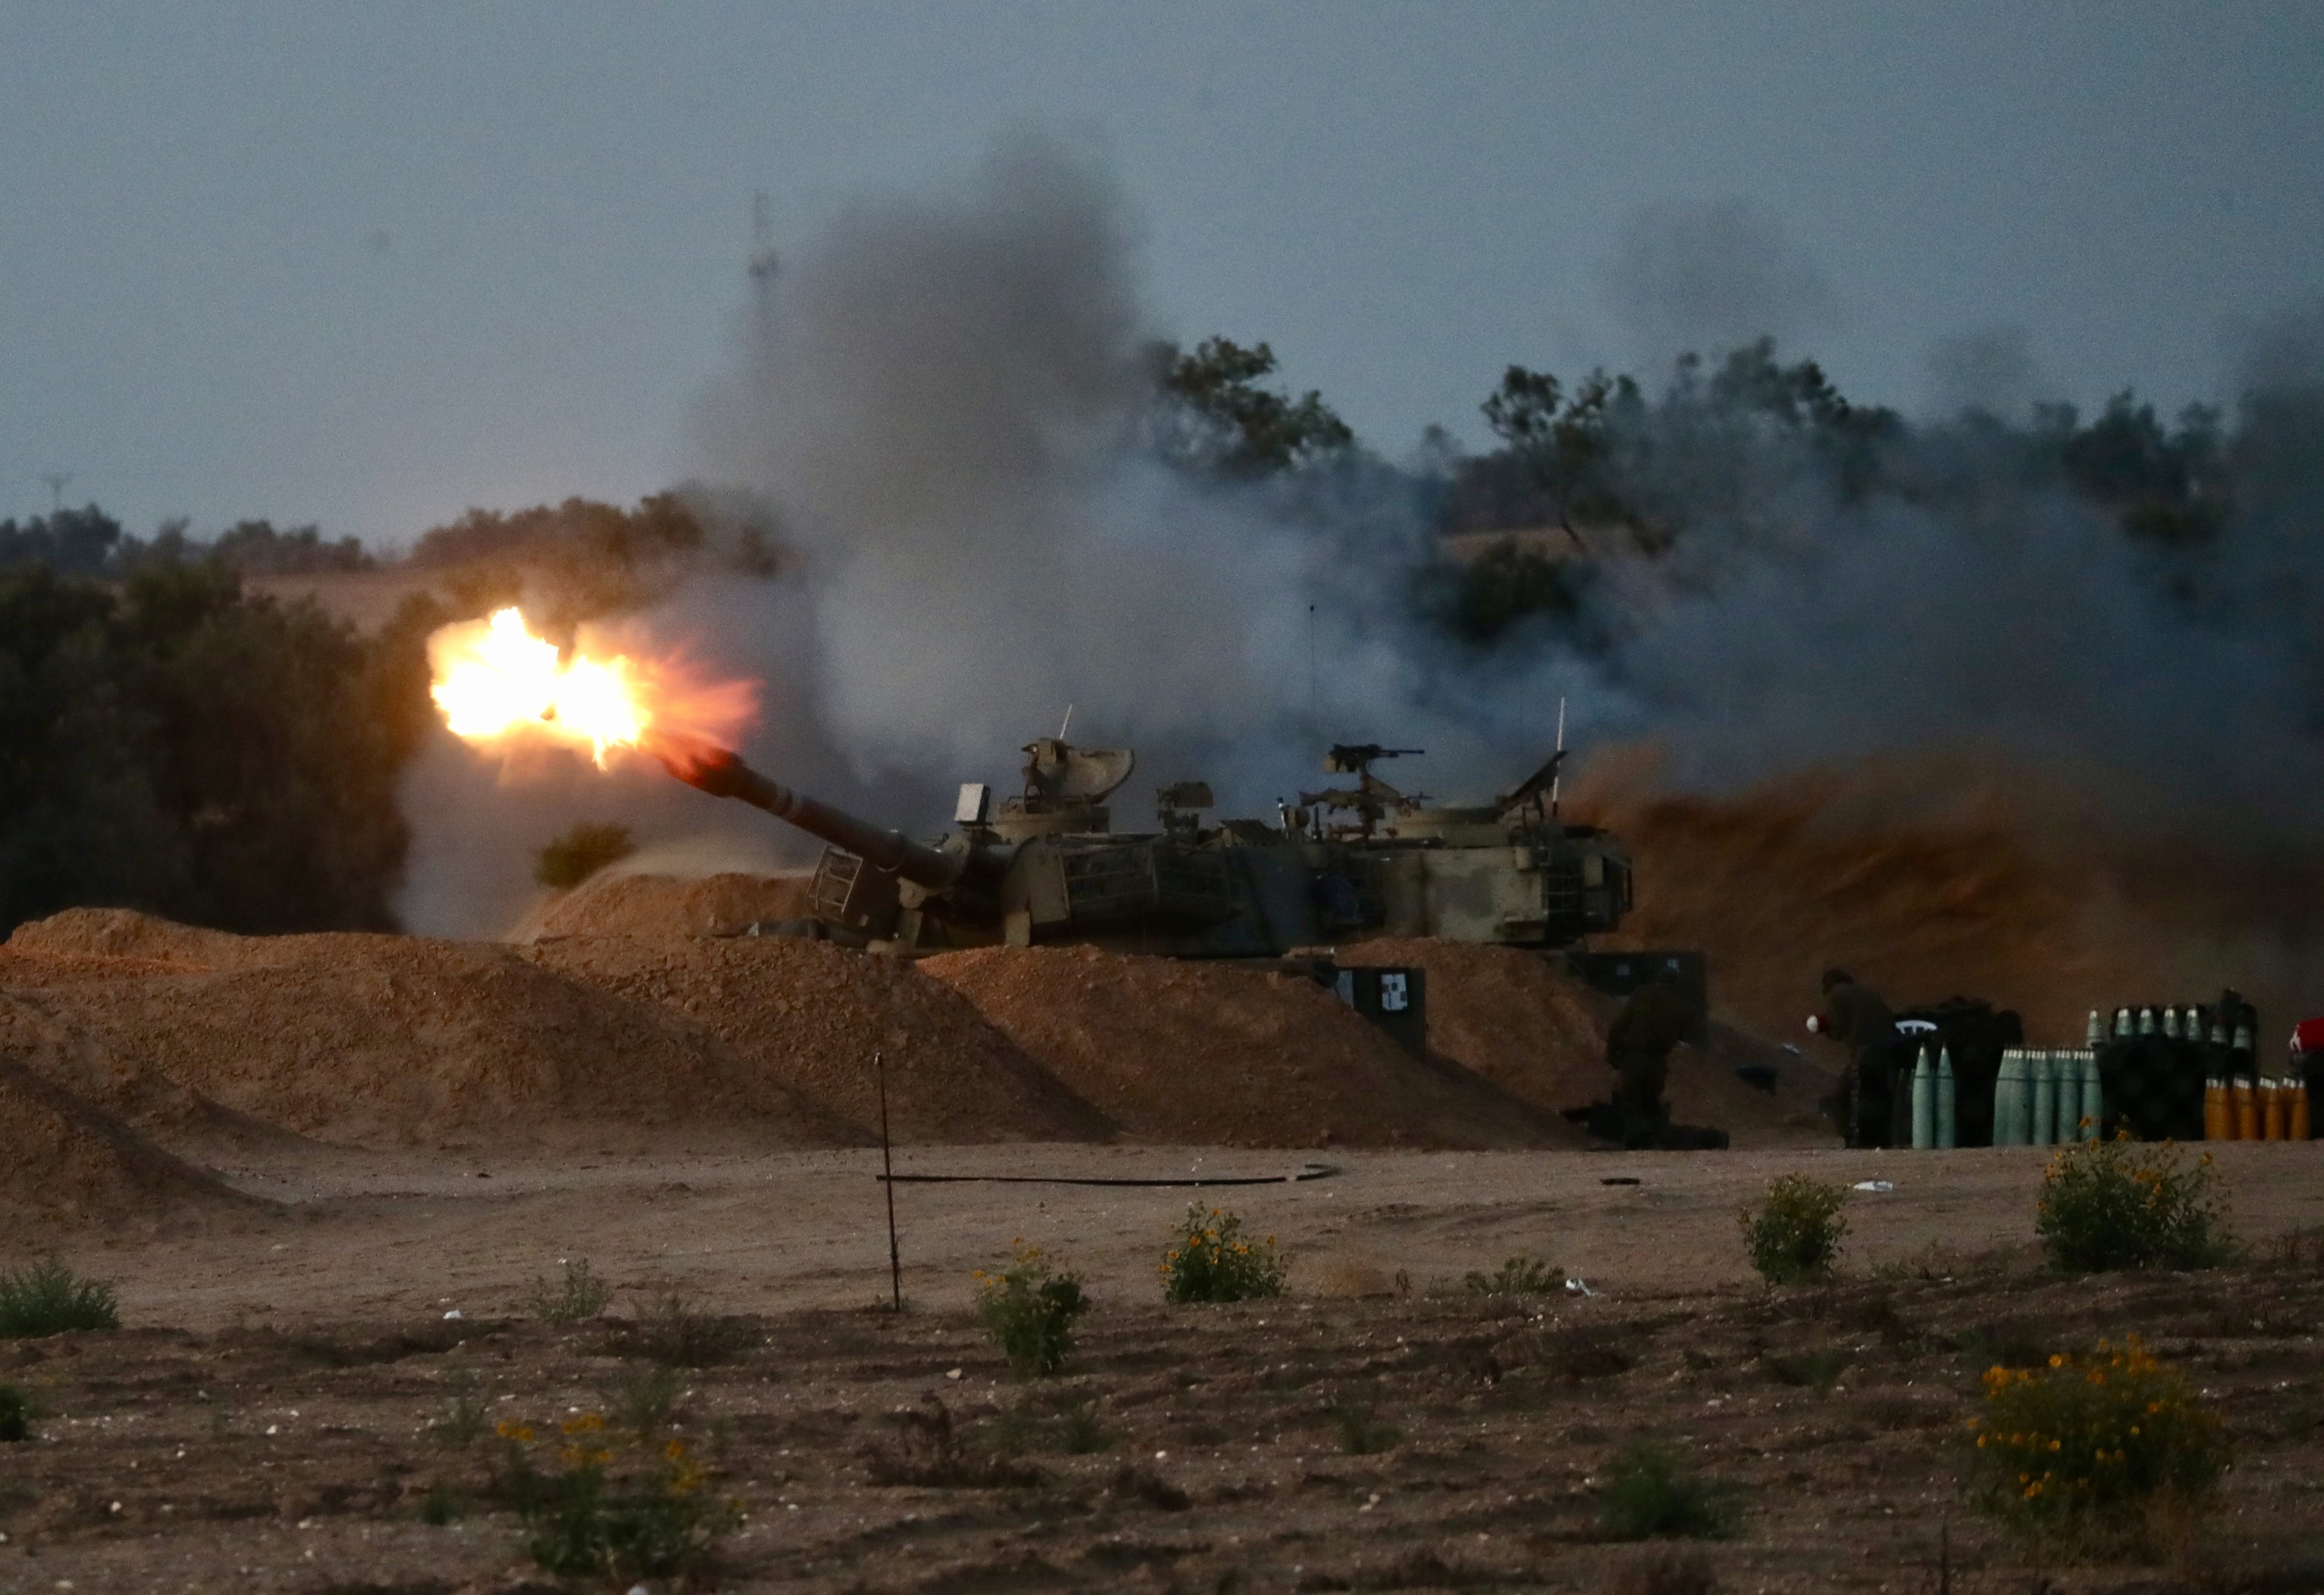 An Israeli self-propelled howitzer fires near the Kerem Shalom crossing on Wednesday. Photo: Xinhua